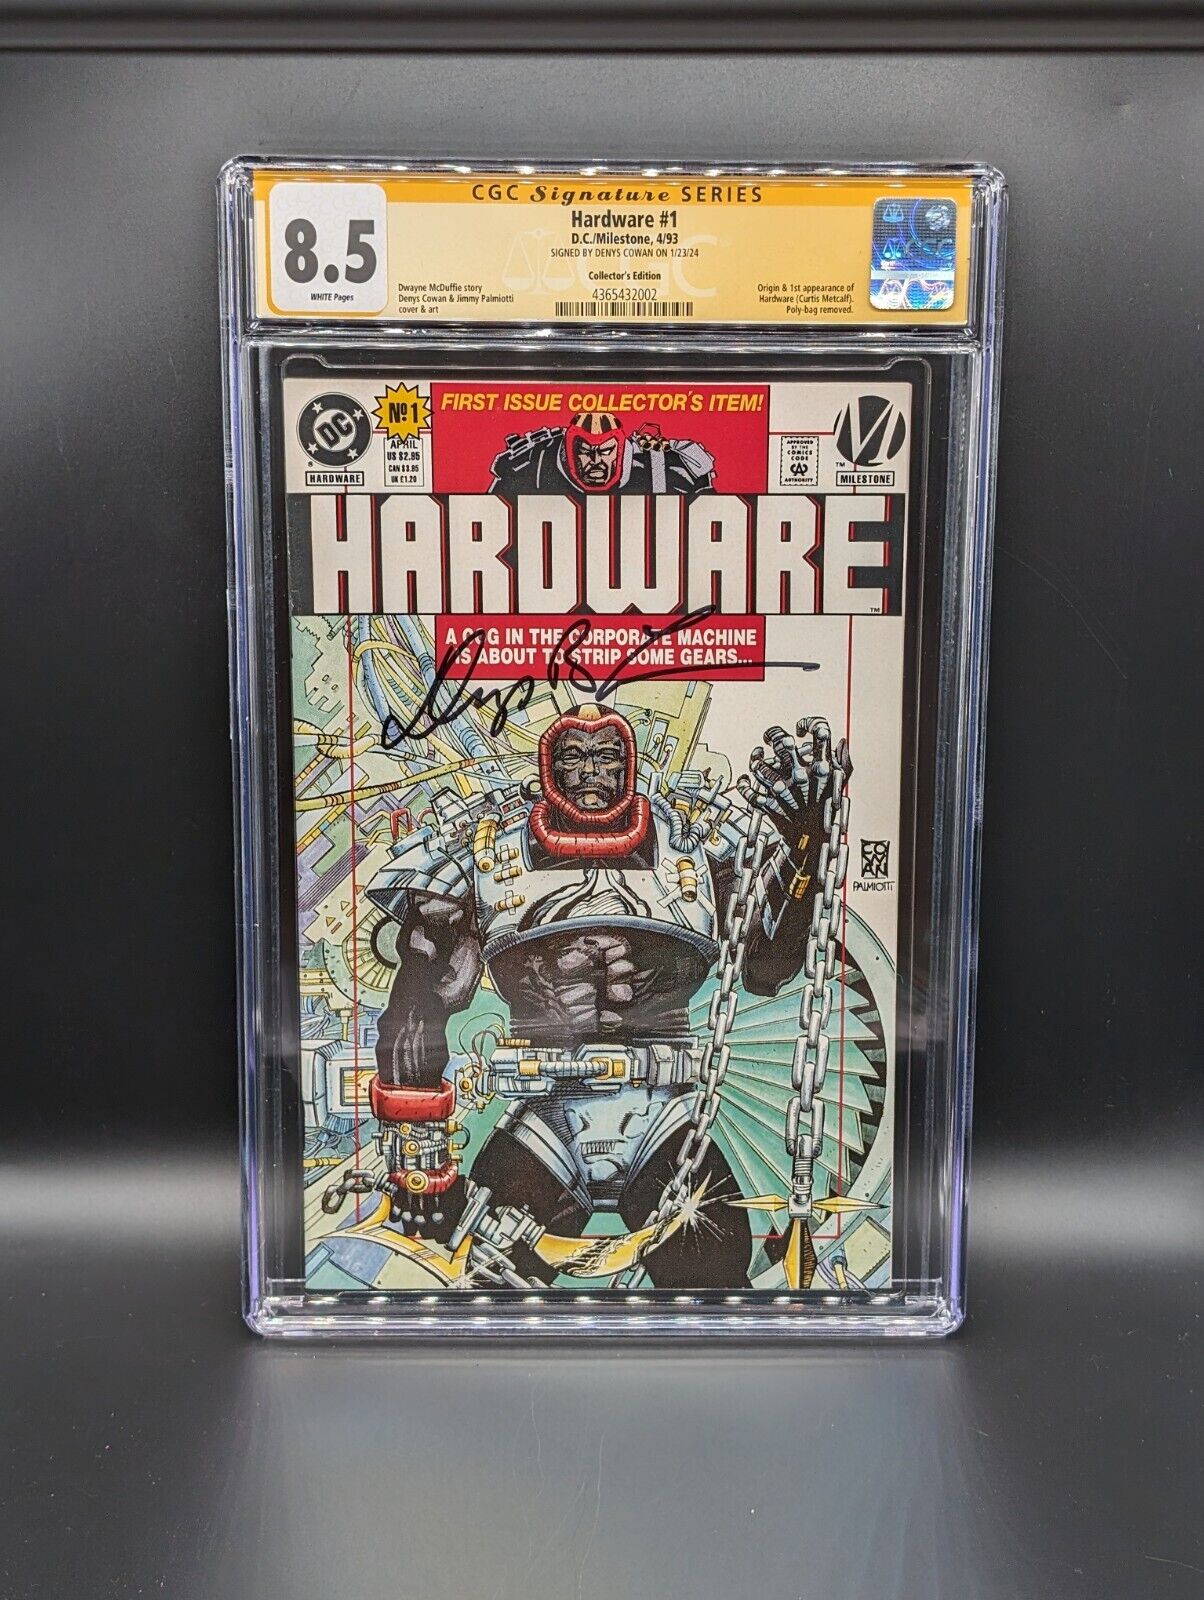 CGC 8.5 Sign Series Hardware #1 Collector Edition Variant Signed by Denys Cowan